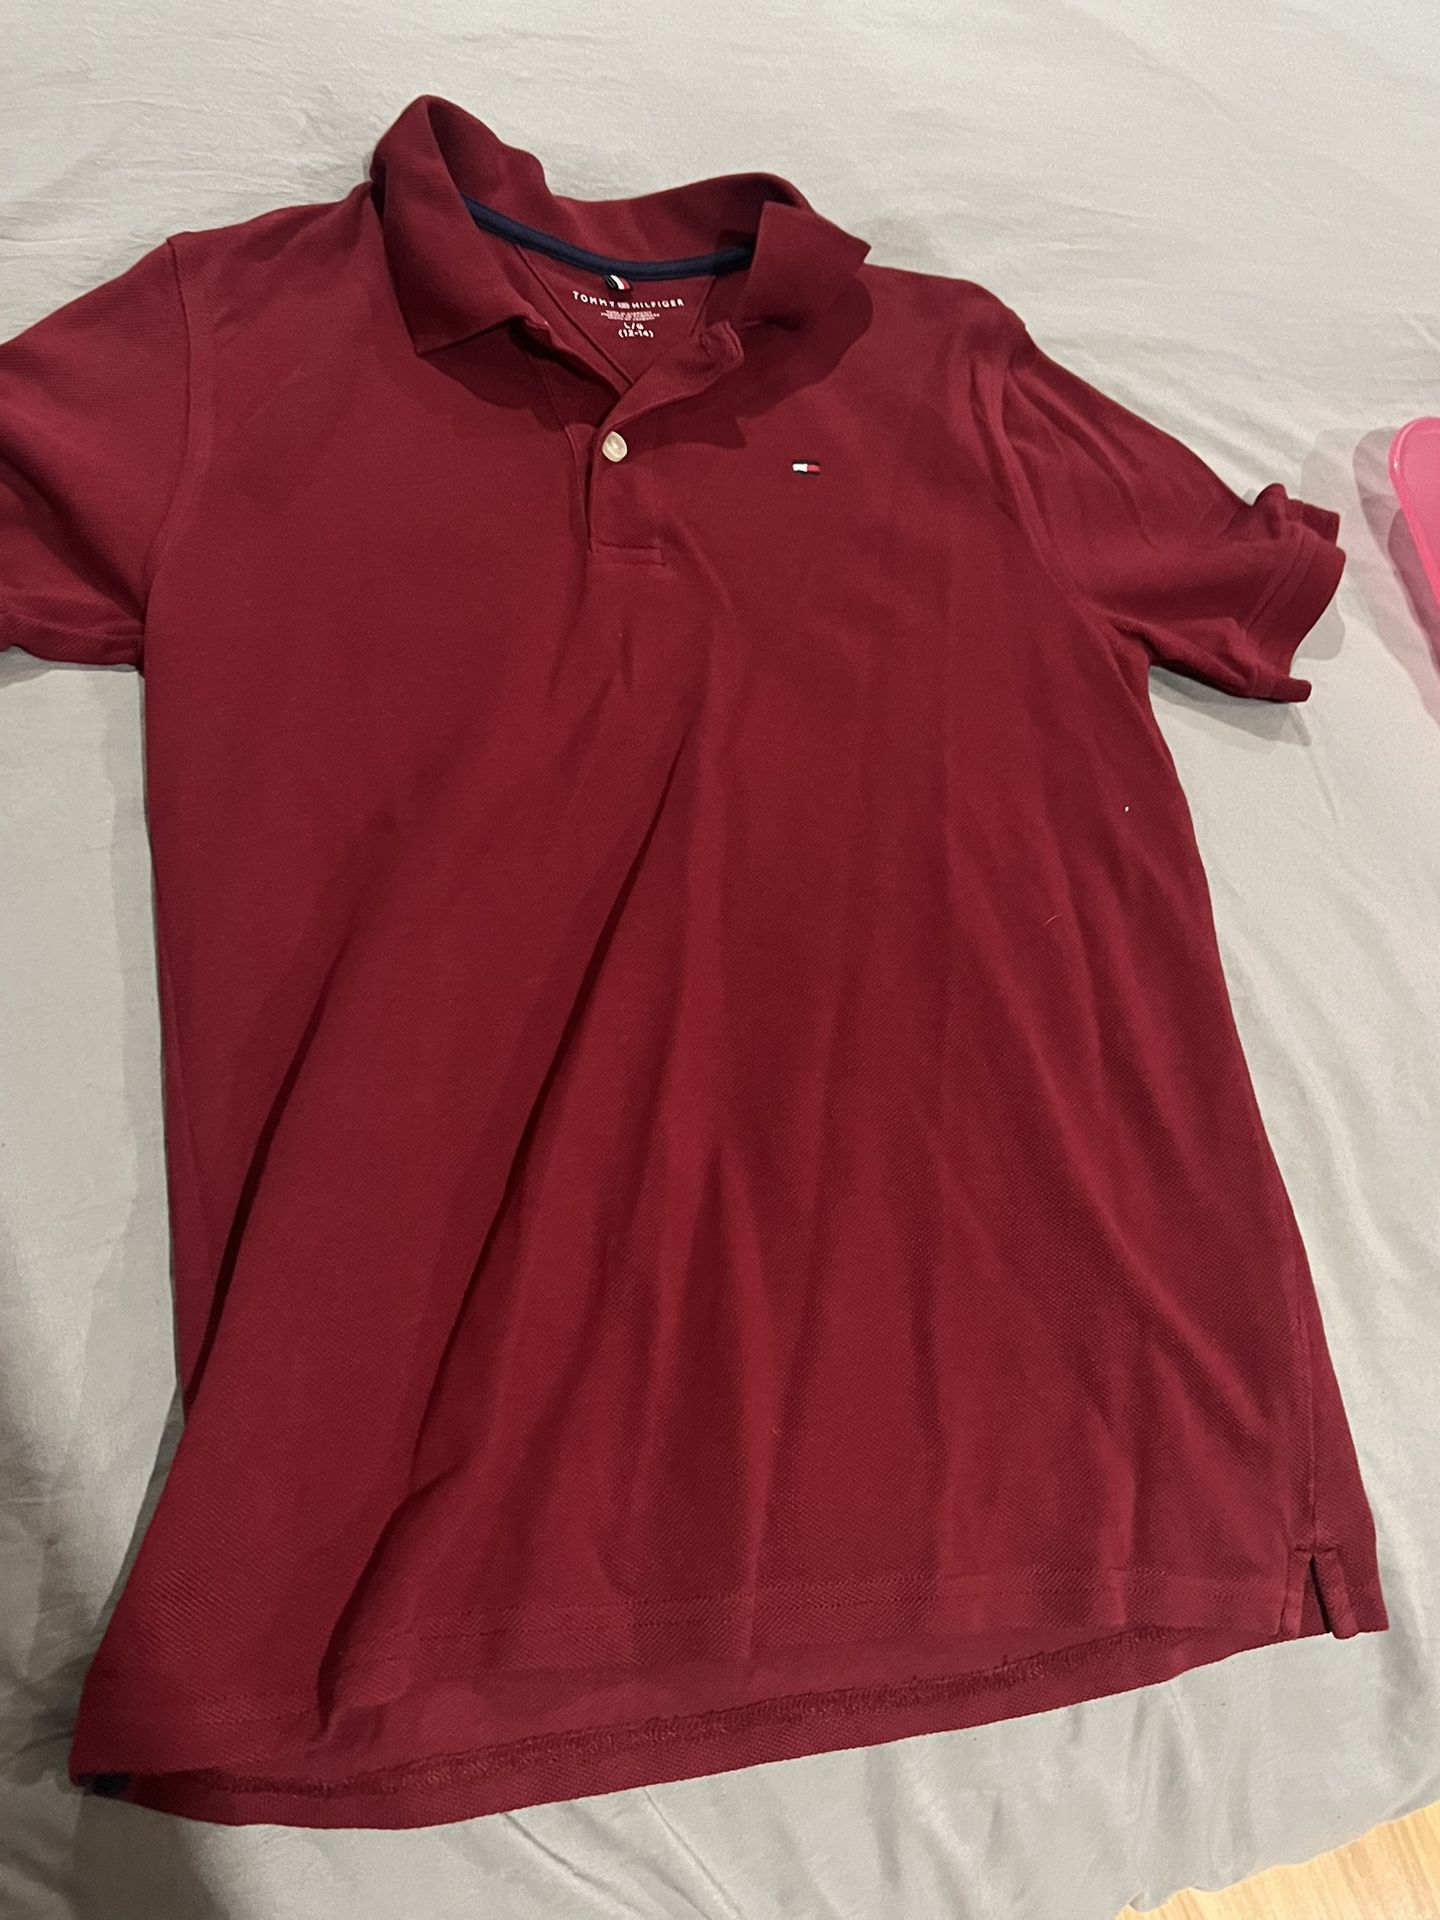 NEW ITEMS Boys - Size 10 Clothes (most Brand New)